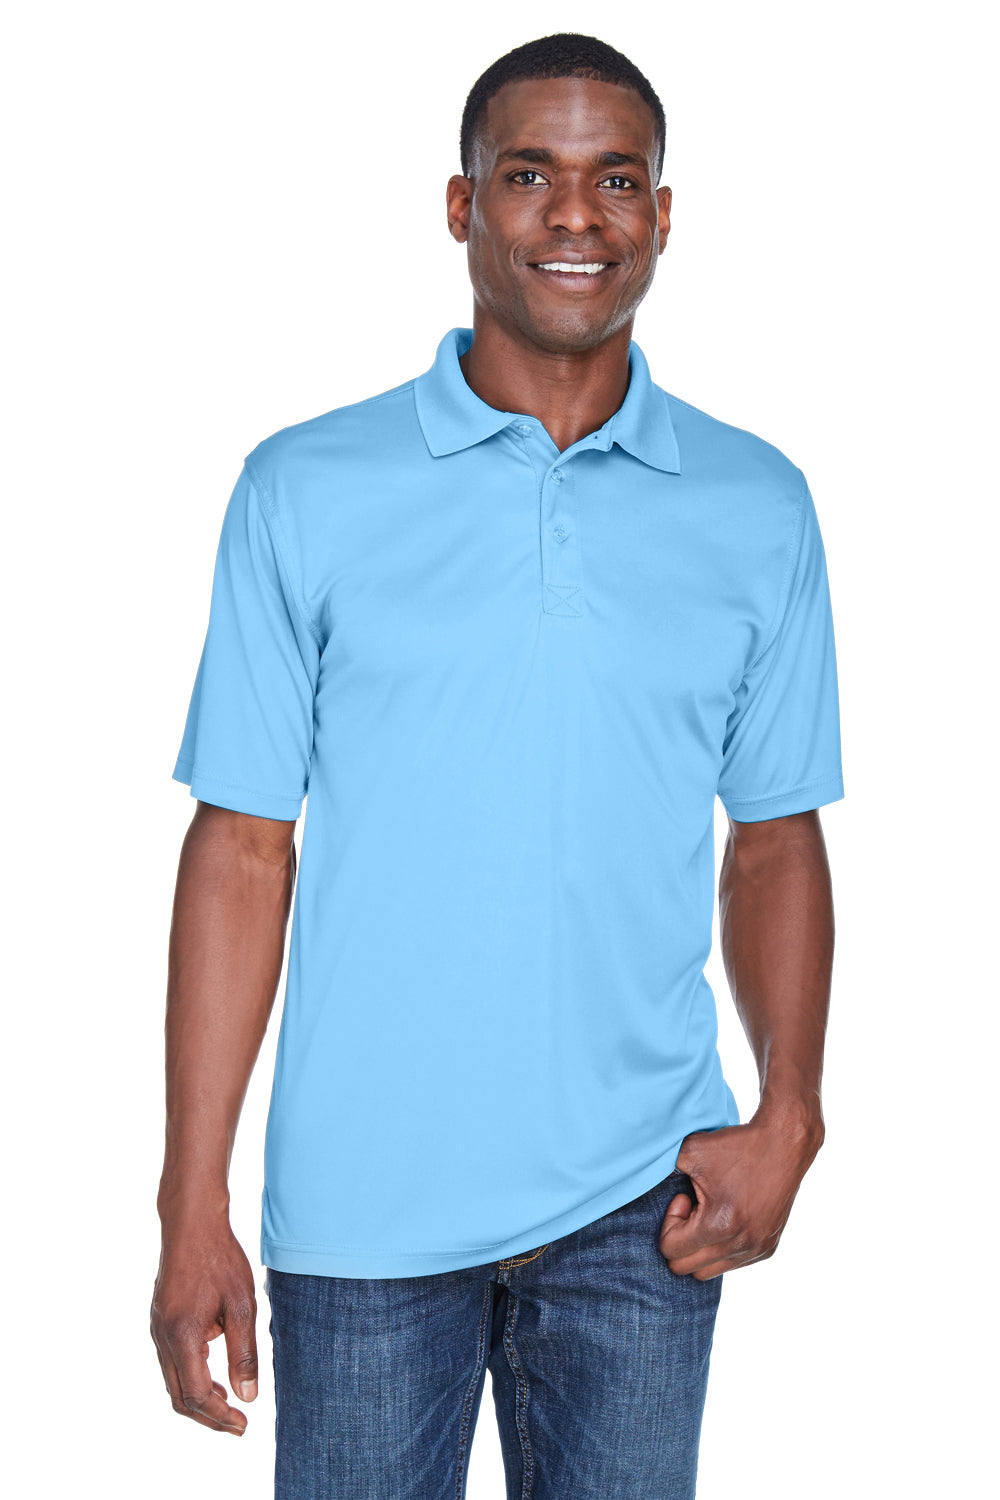 UltraClub 8425 Mens Cool & Dry Performance Moisture Wicking Short Sleeve Polo Shirt Columbia Blue Front